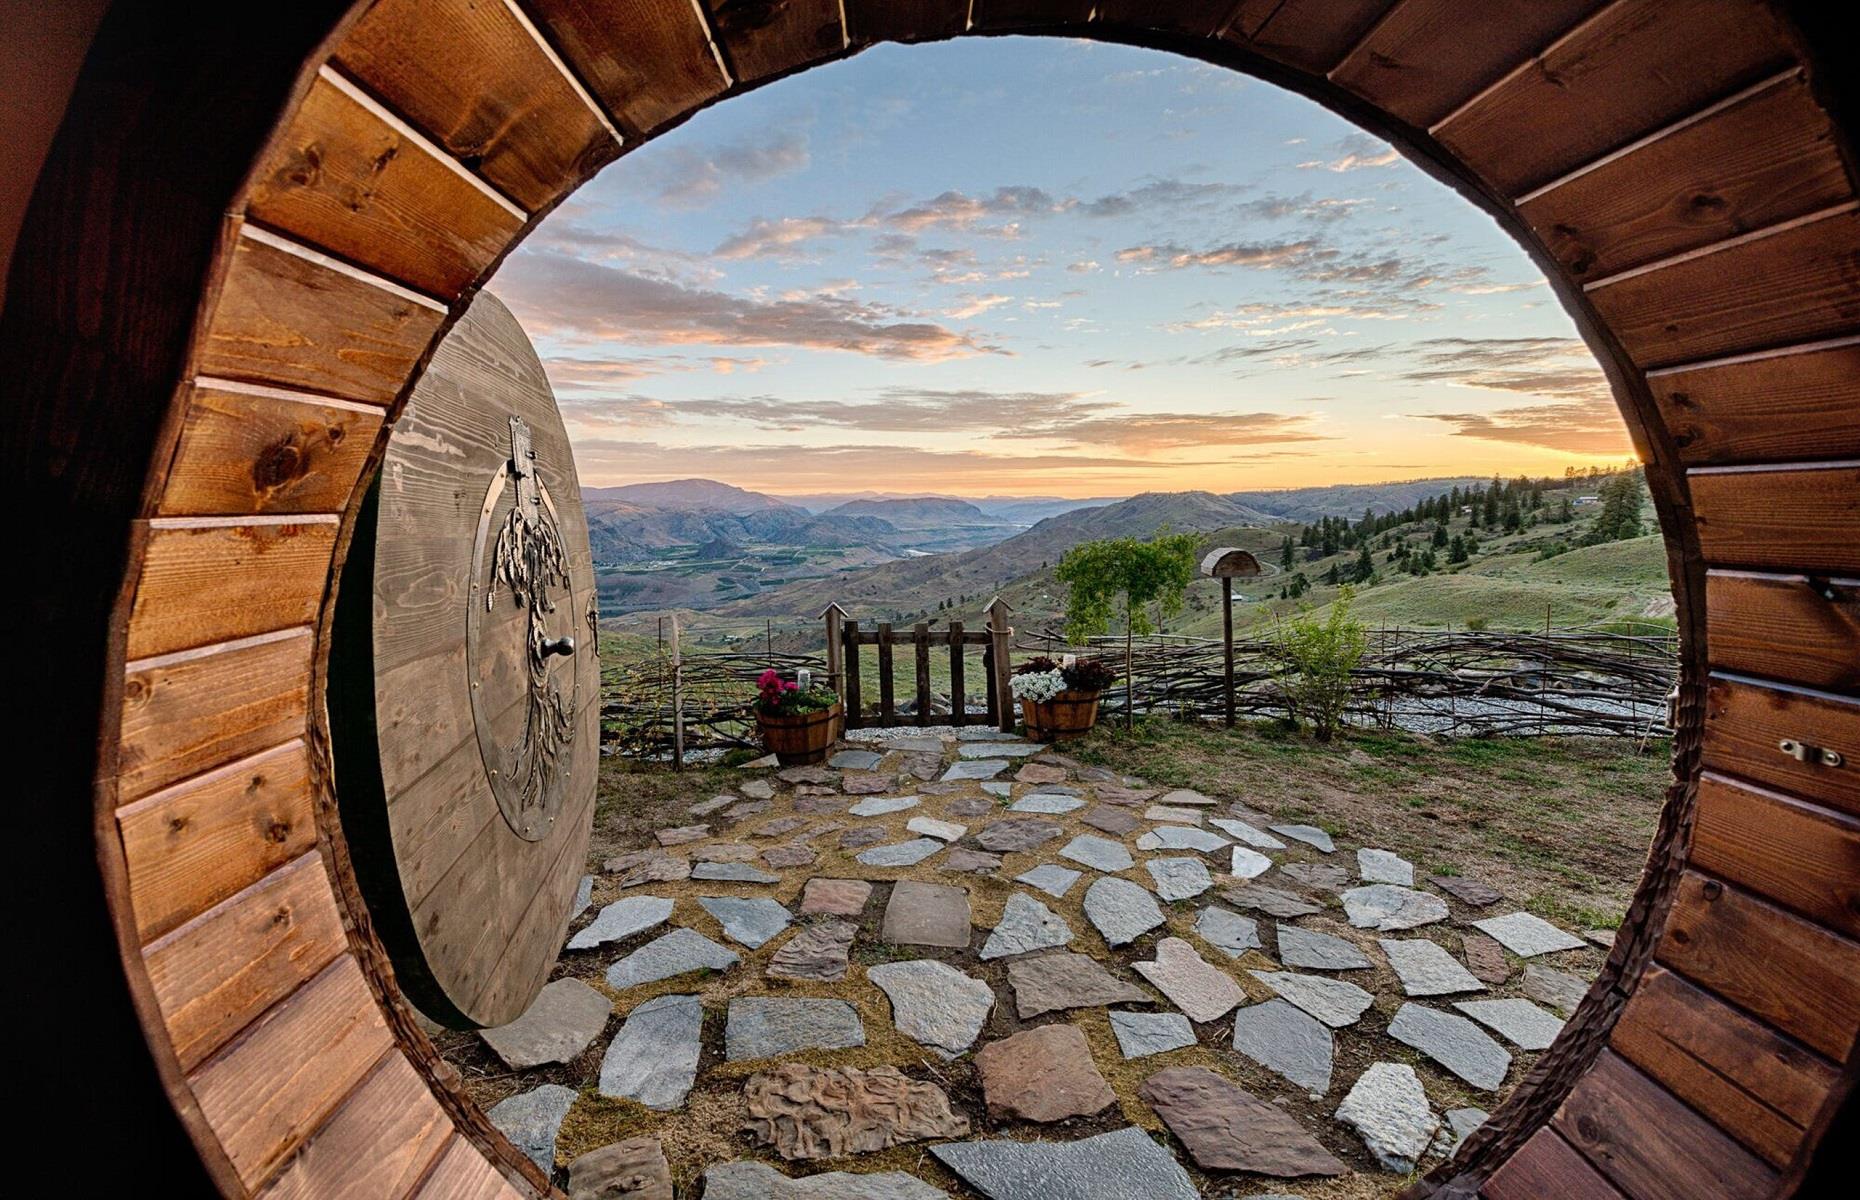 READ MORE: Magical dwellings inspired by Middle-earth